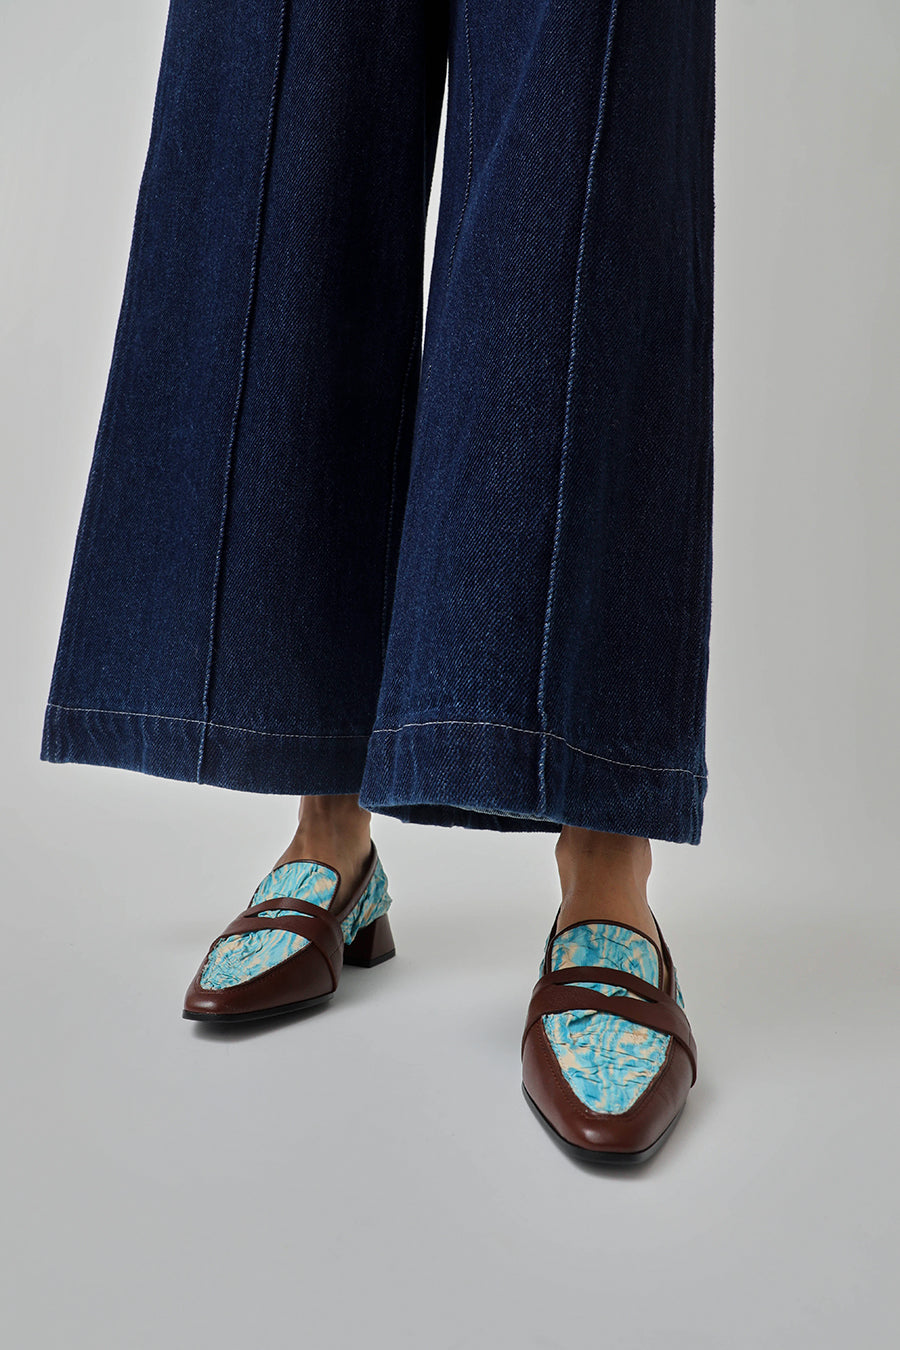 Suzanne Rae Pointed Loafer in Aqua Plissé and Sequoia Nappa